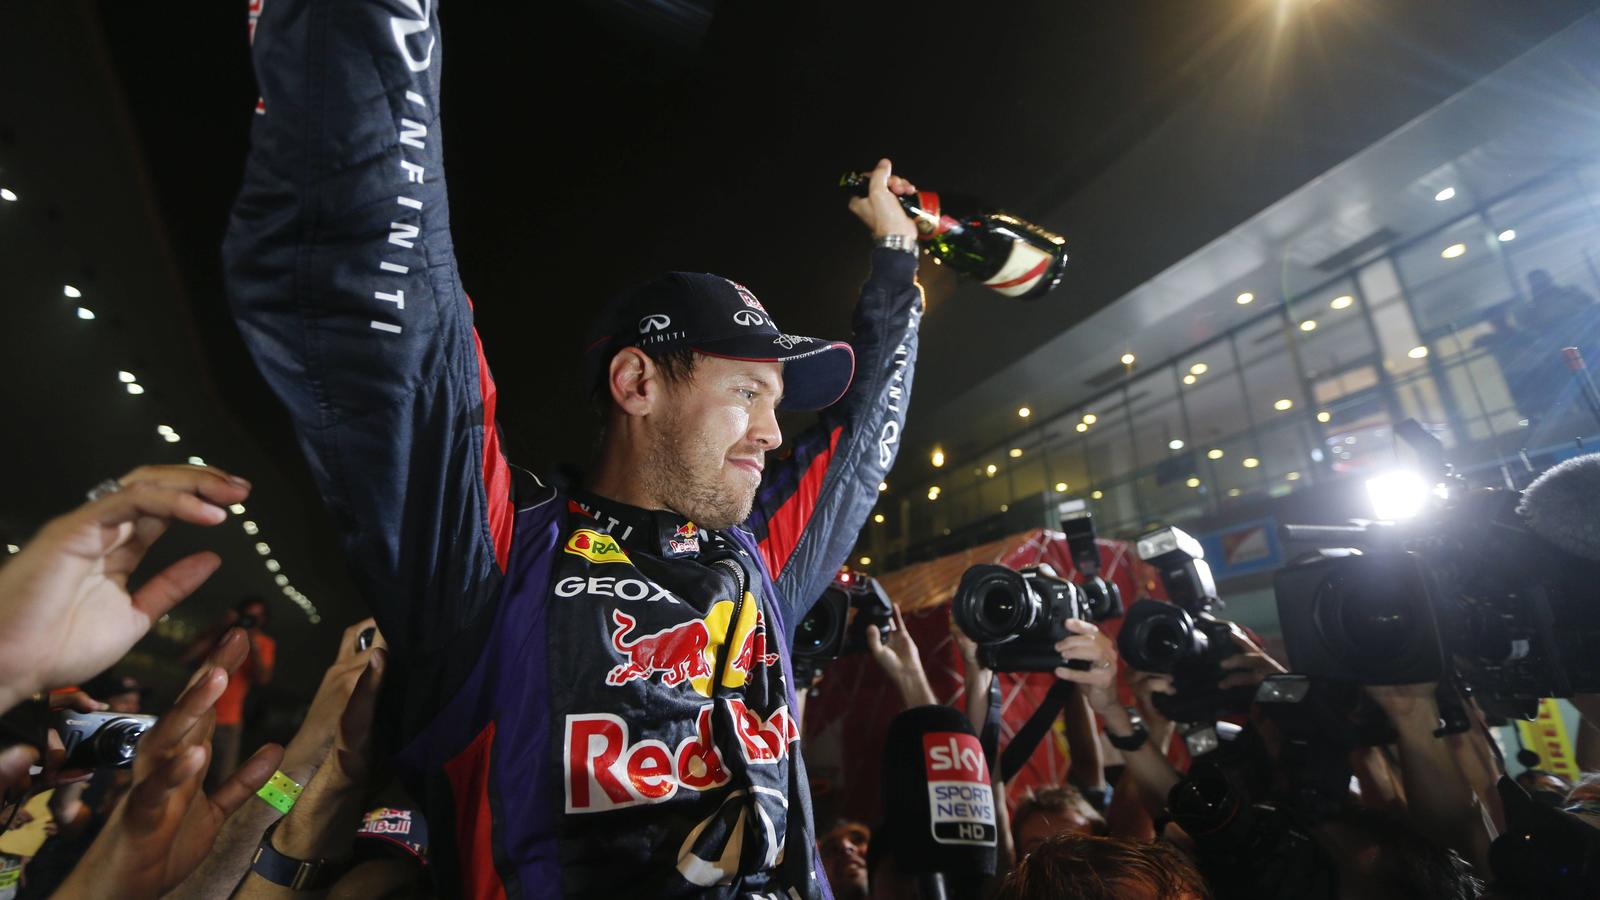 Oct. 27, 2013 - New Delhi, India - SEBASTIAN VETTEL of Germany and Infiniti Red Bull Racing is seen celebrating in the pit lane after claiming his fourth consecutive Formula 1 World Championship at the Formula 1 Indian Grand Prix 2013 at the Buddh In